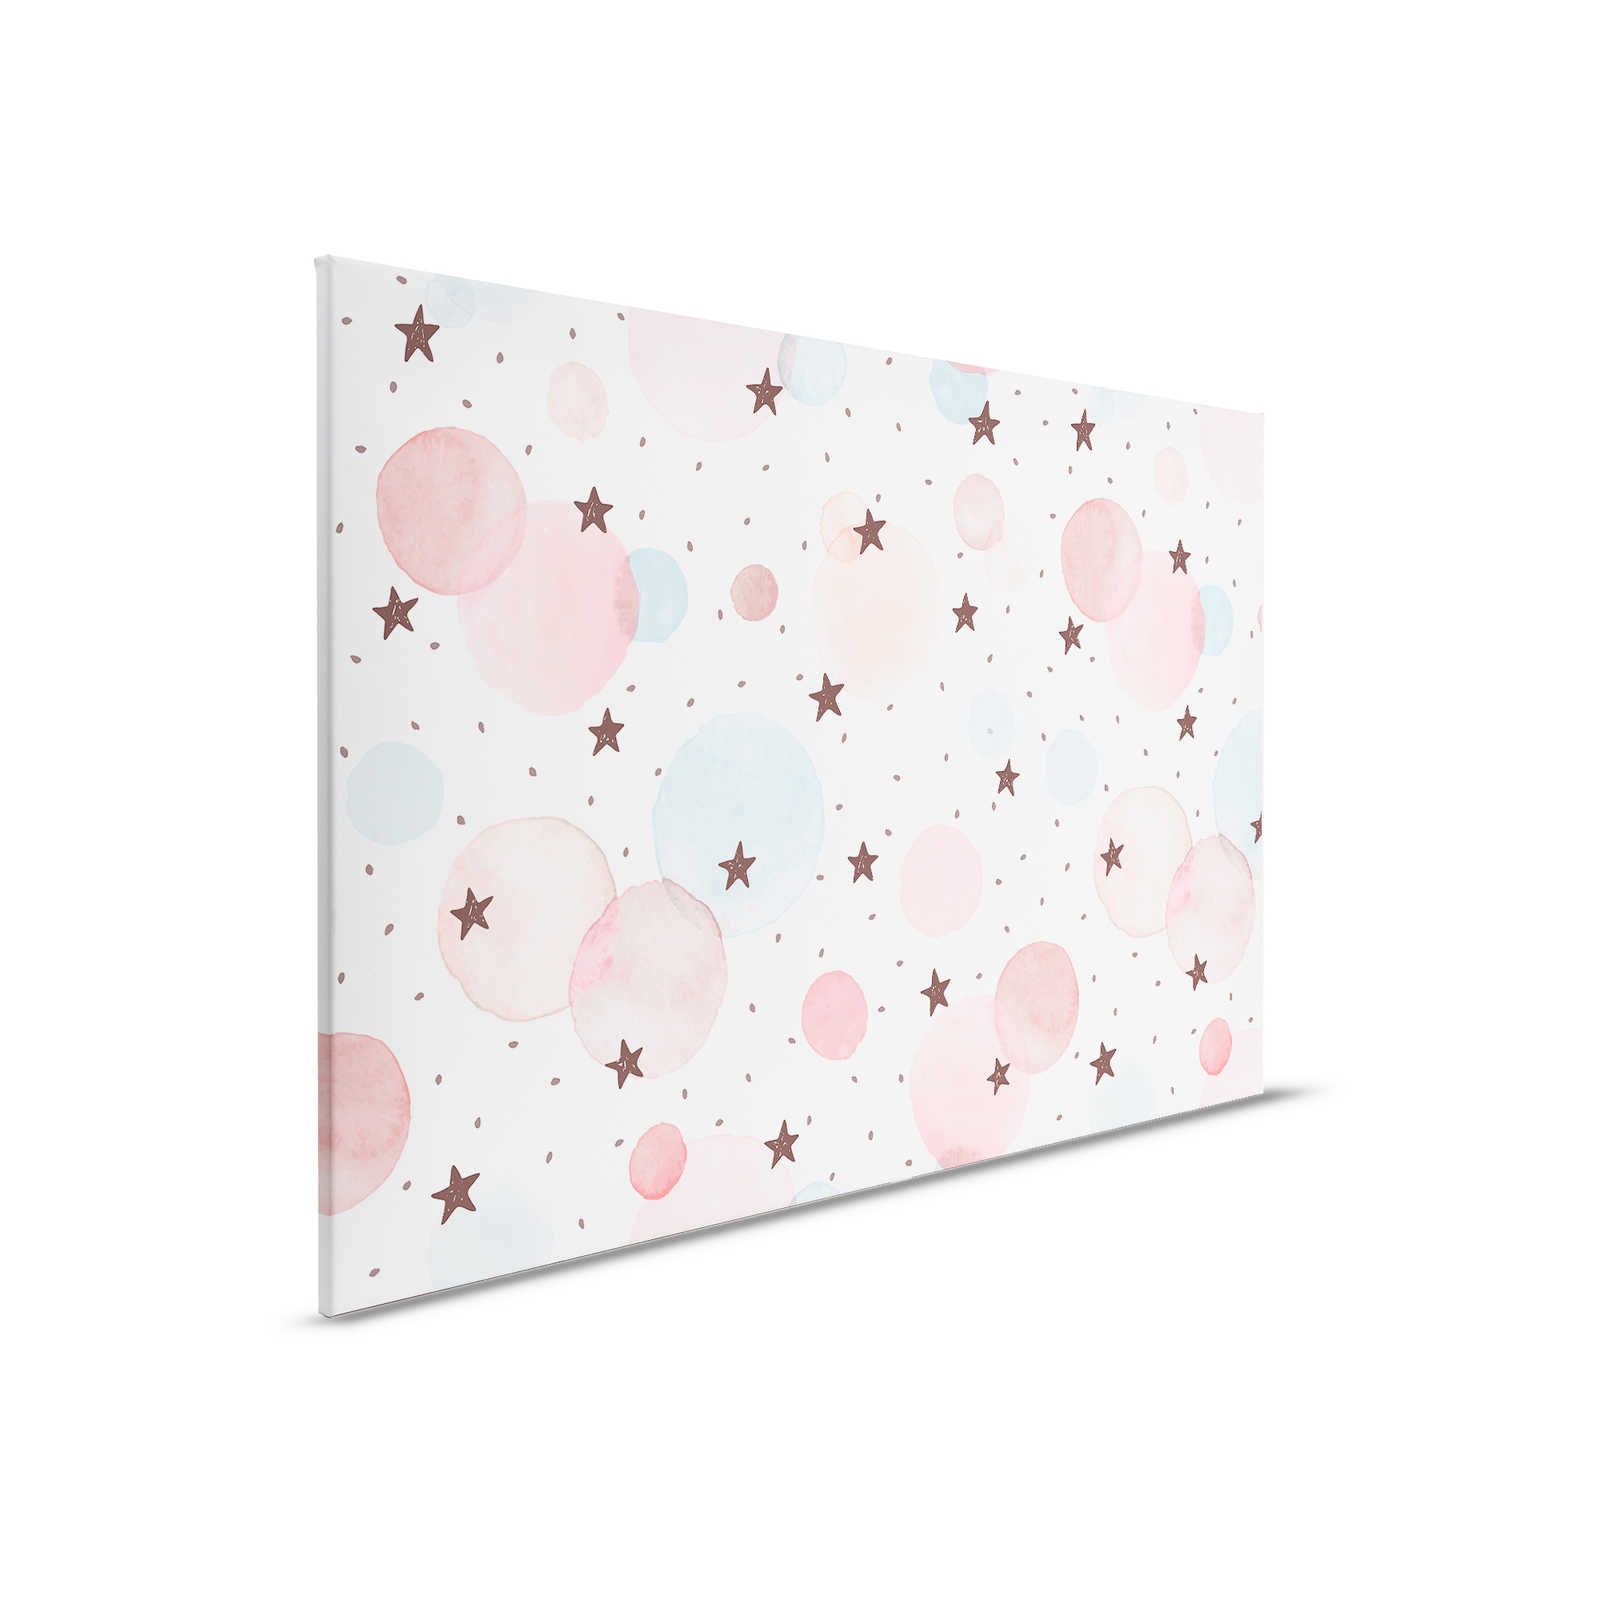         Canvas for children's room with stars, dots and circles - 90 cm x 60 cm
    